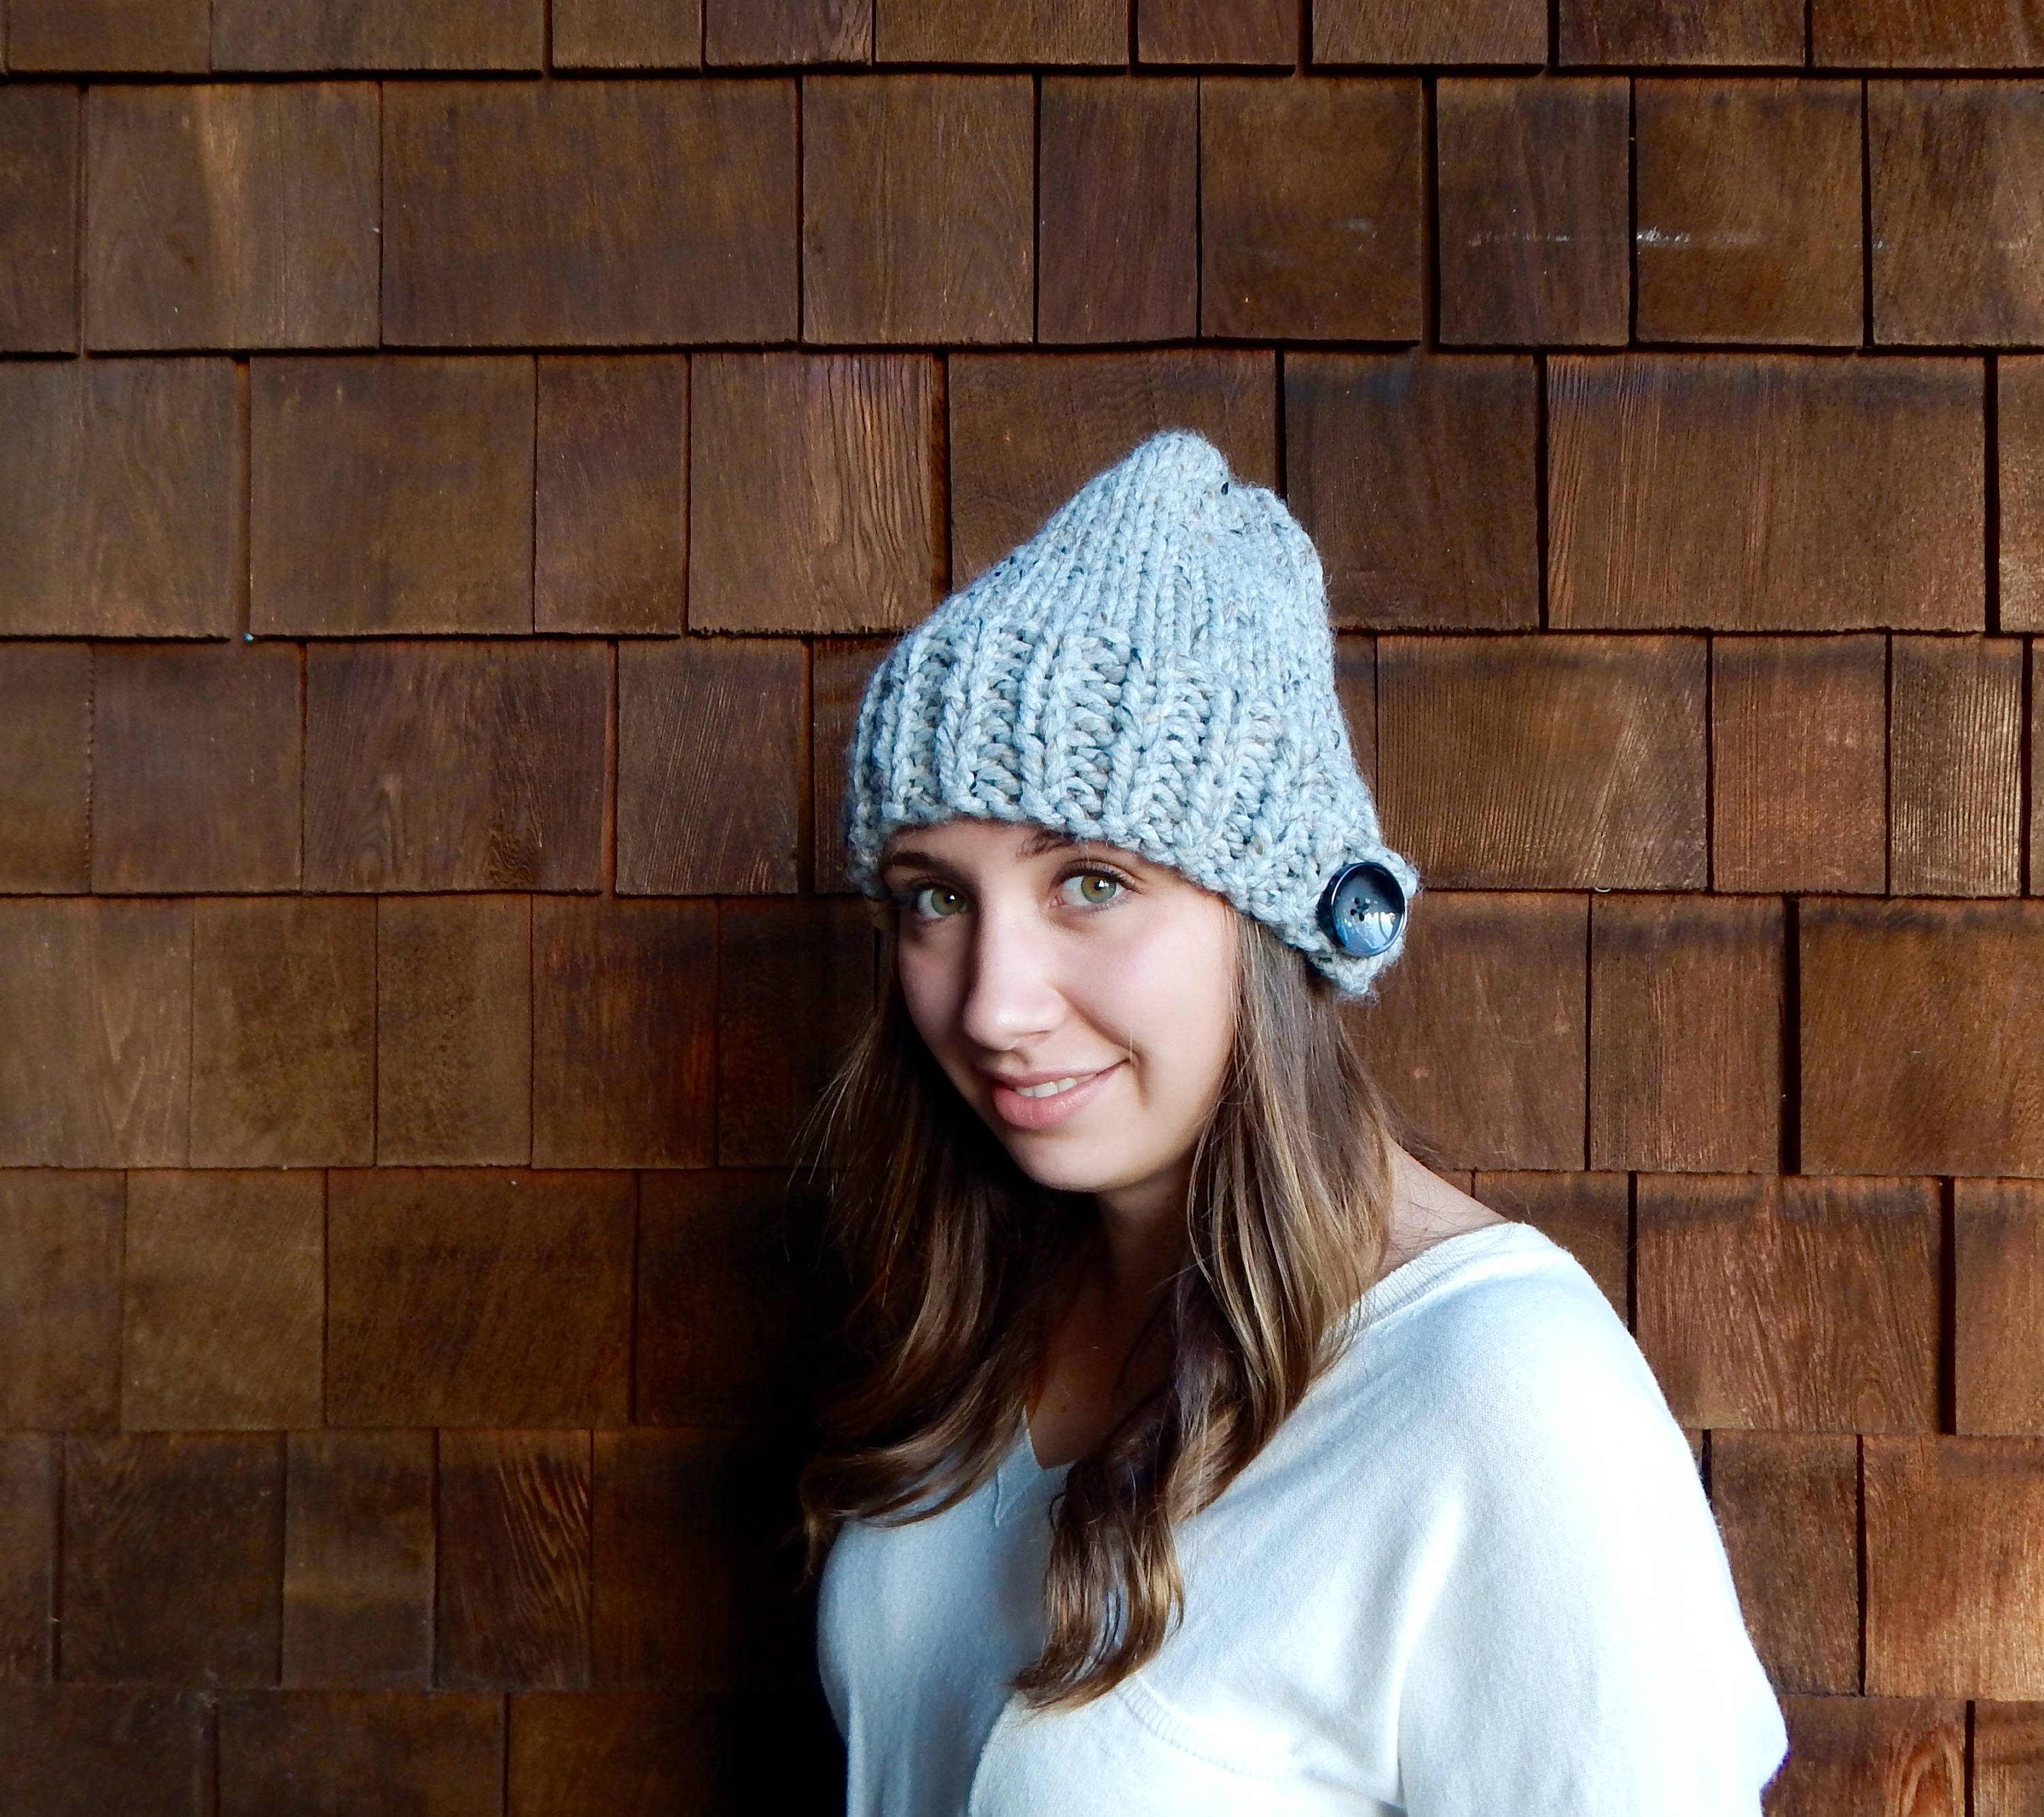 Slouchy Hat, Chunky Knit Hat, , Knit Slouchy Hat in Gray